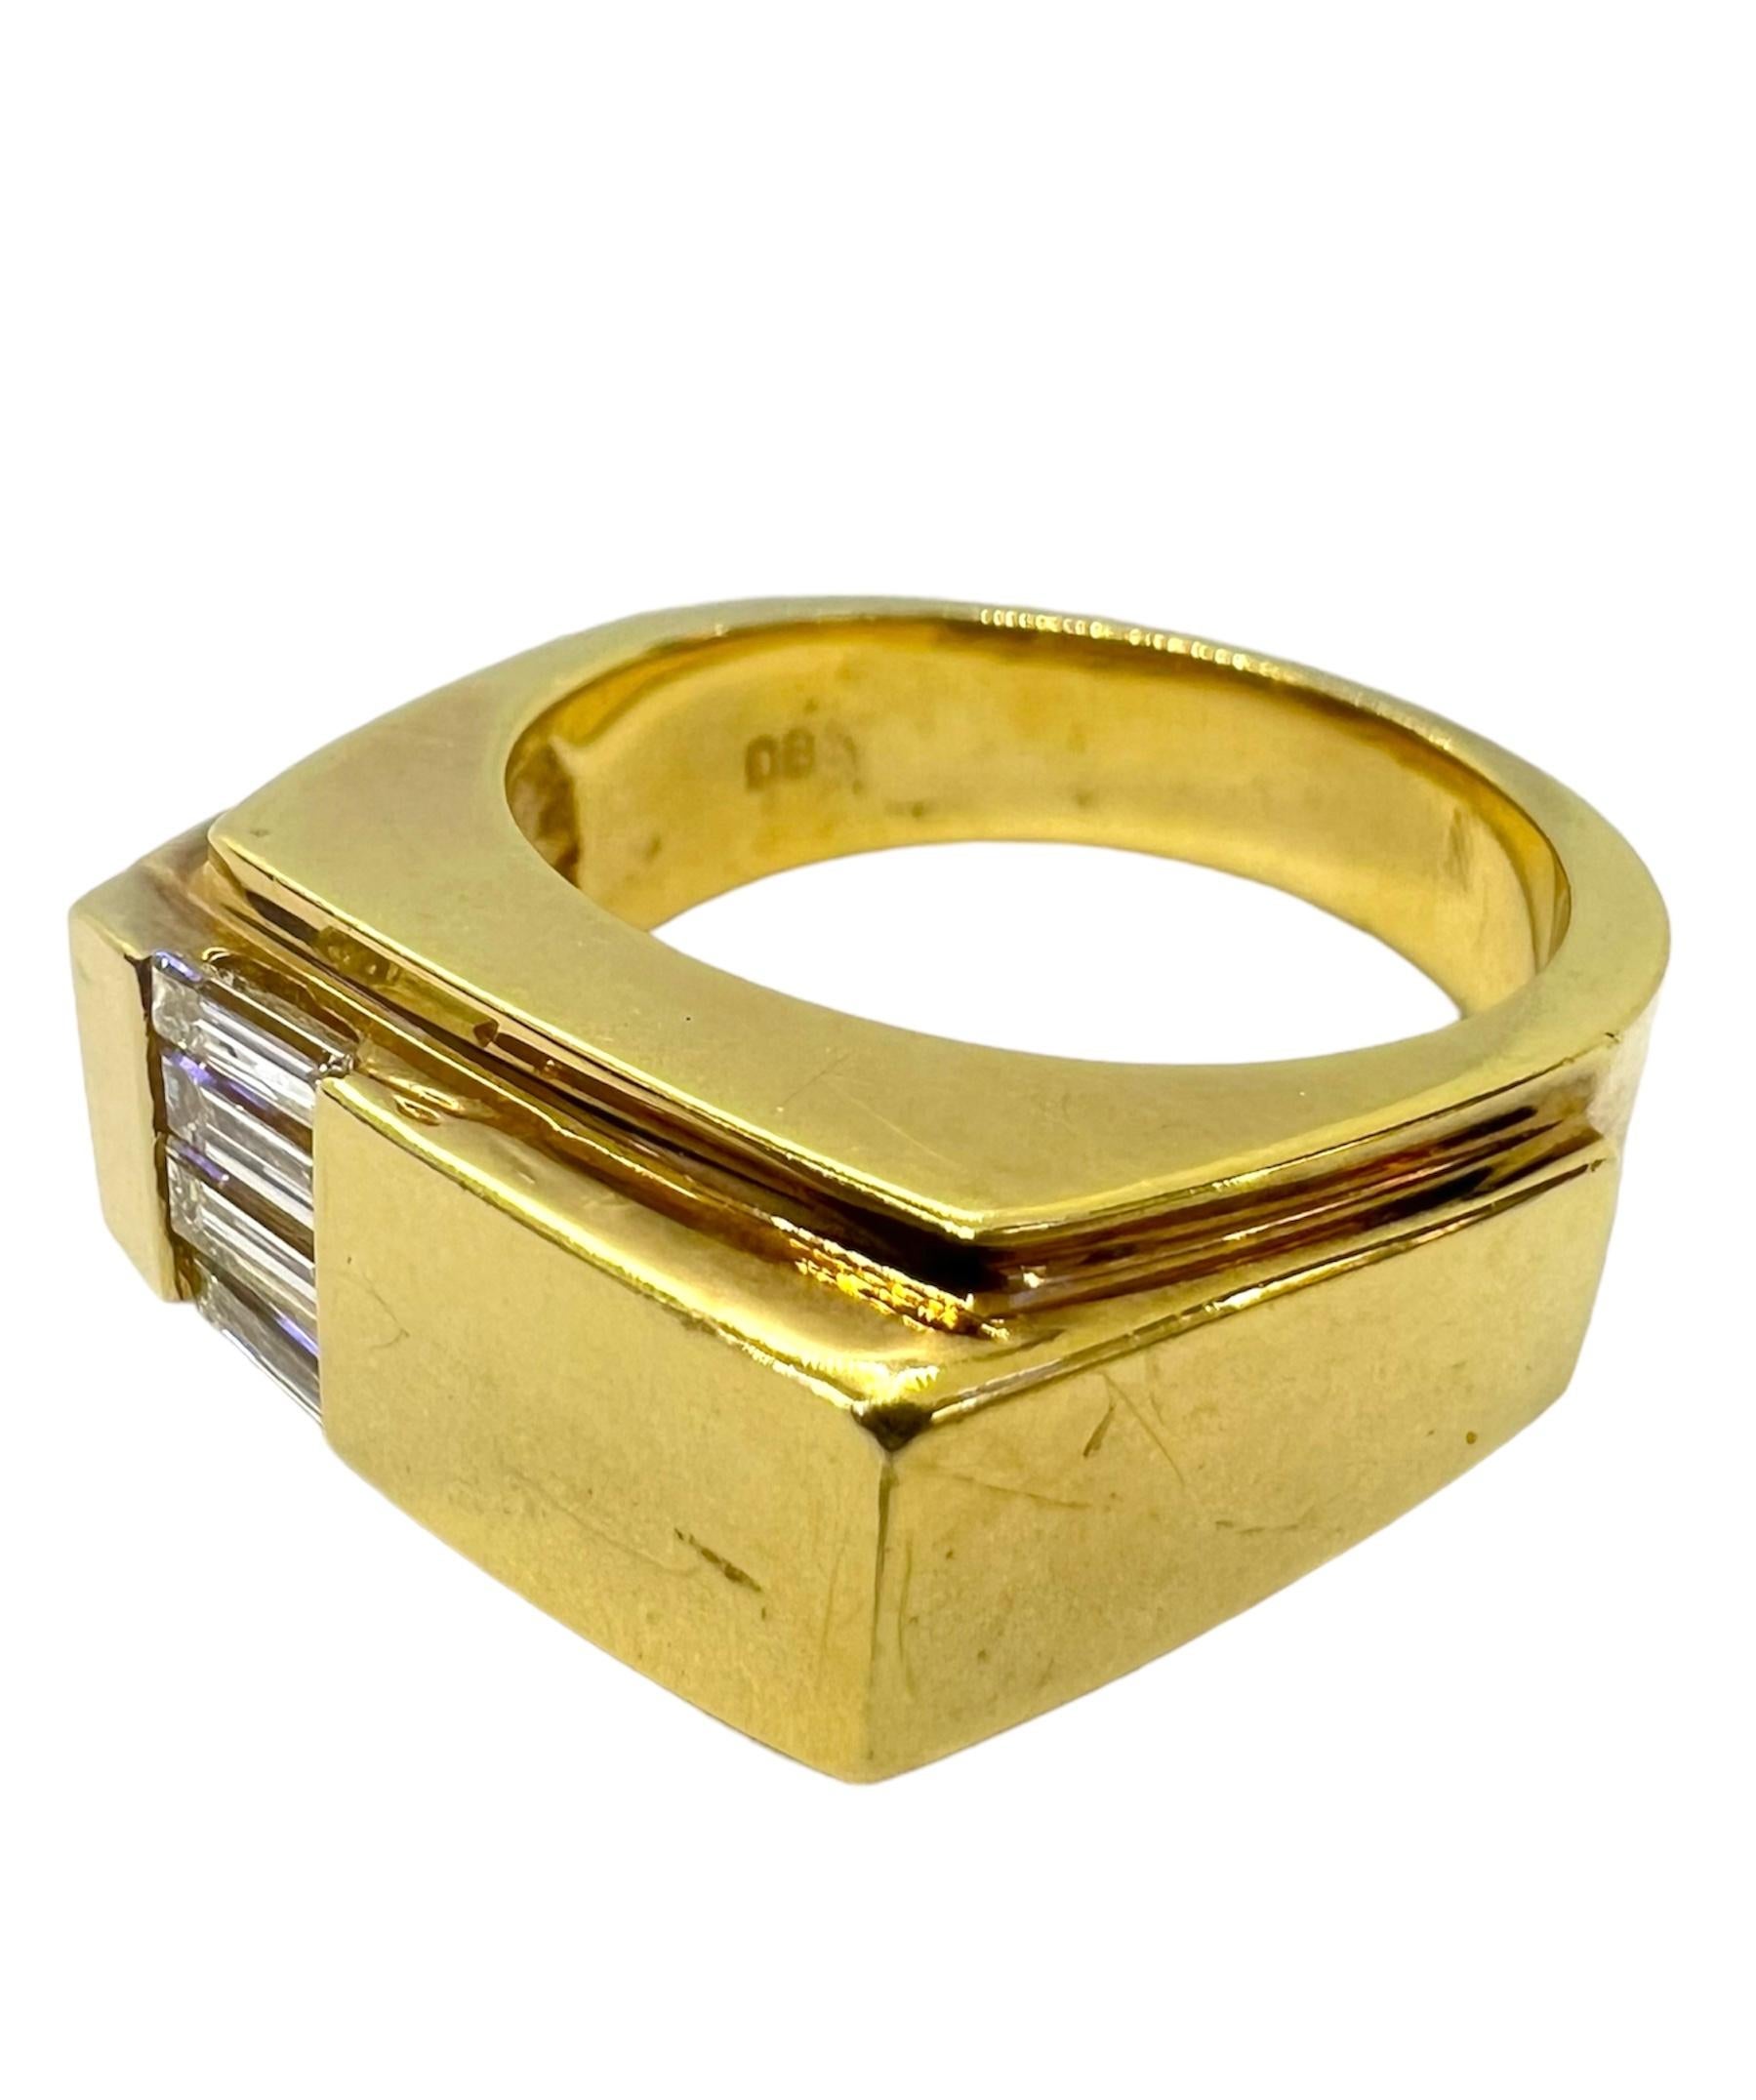 18K yellow gold ring with baguette cut diamonds.

Sophia D by Joseph Dardashti LTD has been known worldwide for 35 years and are inspired by classic Art Deco design that merges with modern manufacturing techniques.   